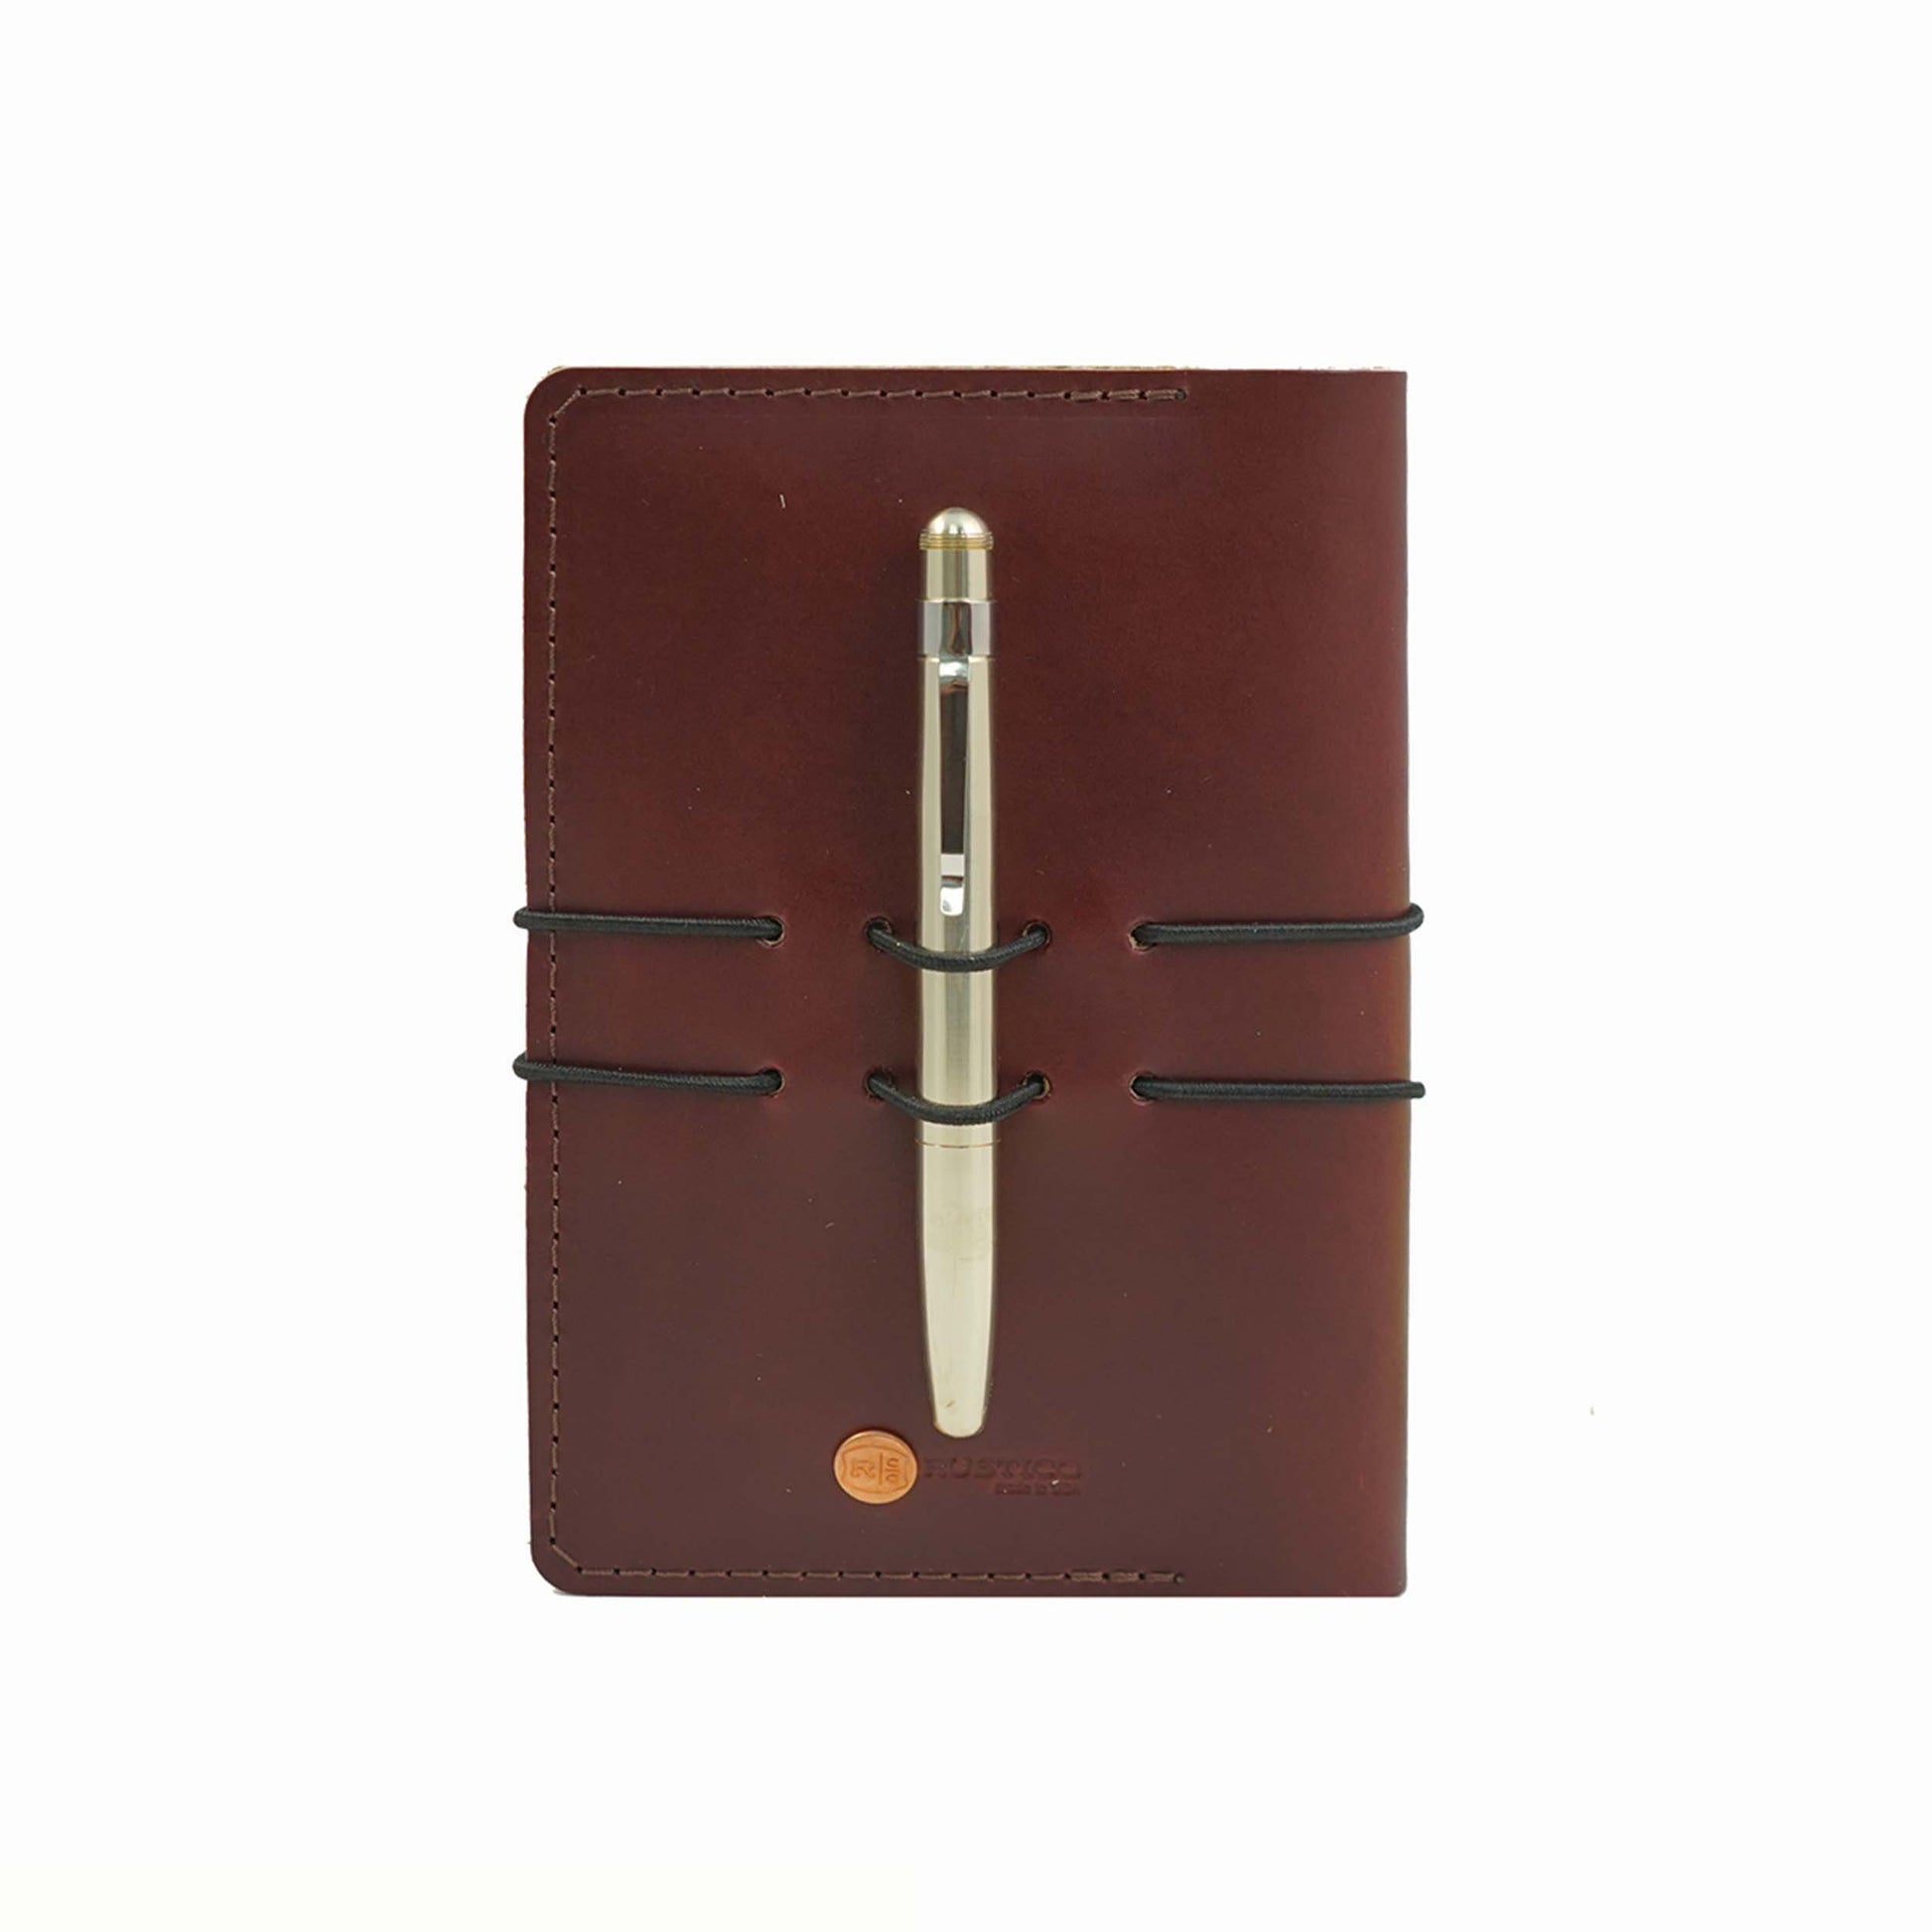 Leather Notebook Cover for Field Notes, Handmade Journal Cover for Moleskine Cahier Journal, Leather Cover with Pen Holder Fits 3.5 x 5.5 Pocket